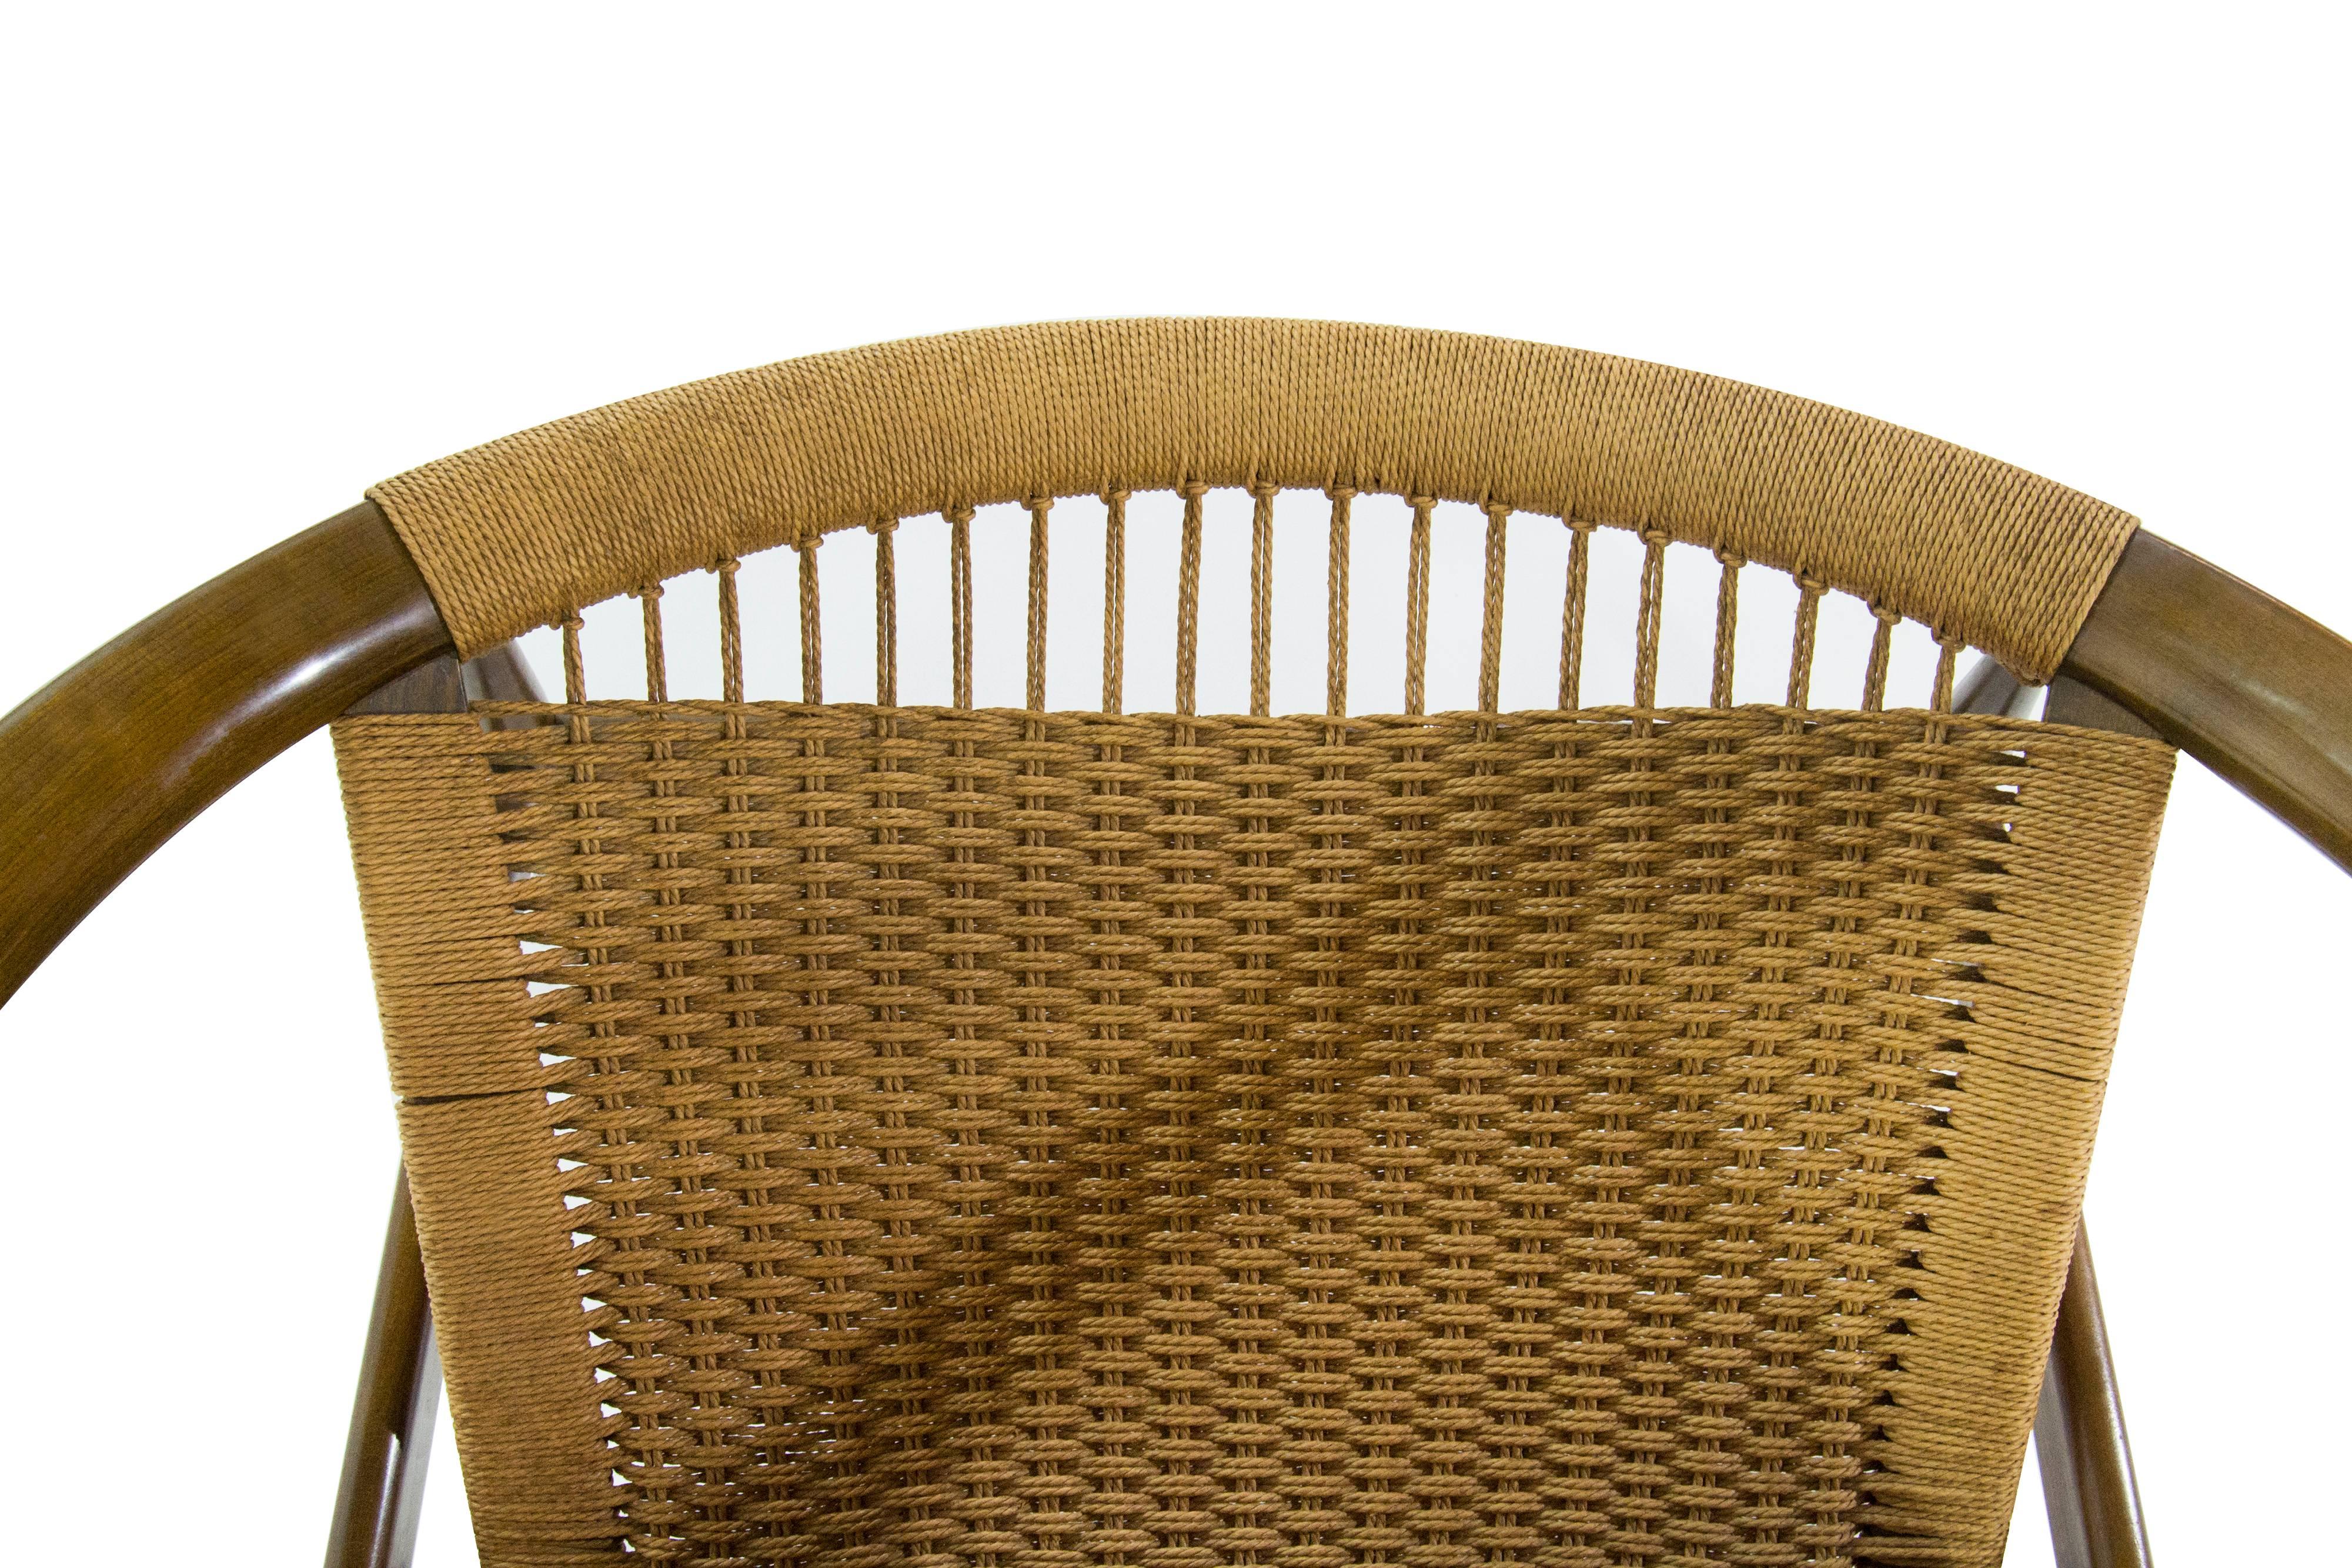 Illum Wikkelso Ringstol Number 23 Teak and Woven Cord Ring Chair 3